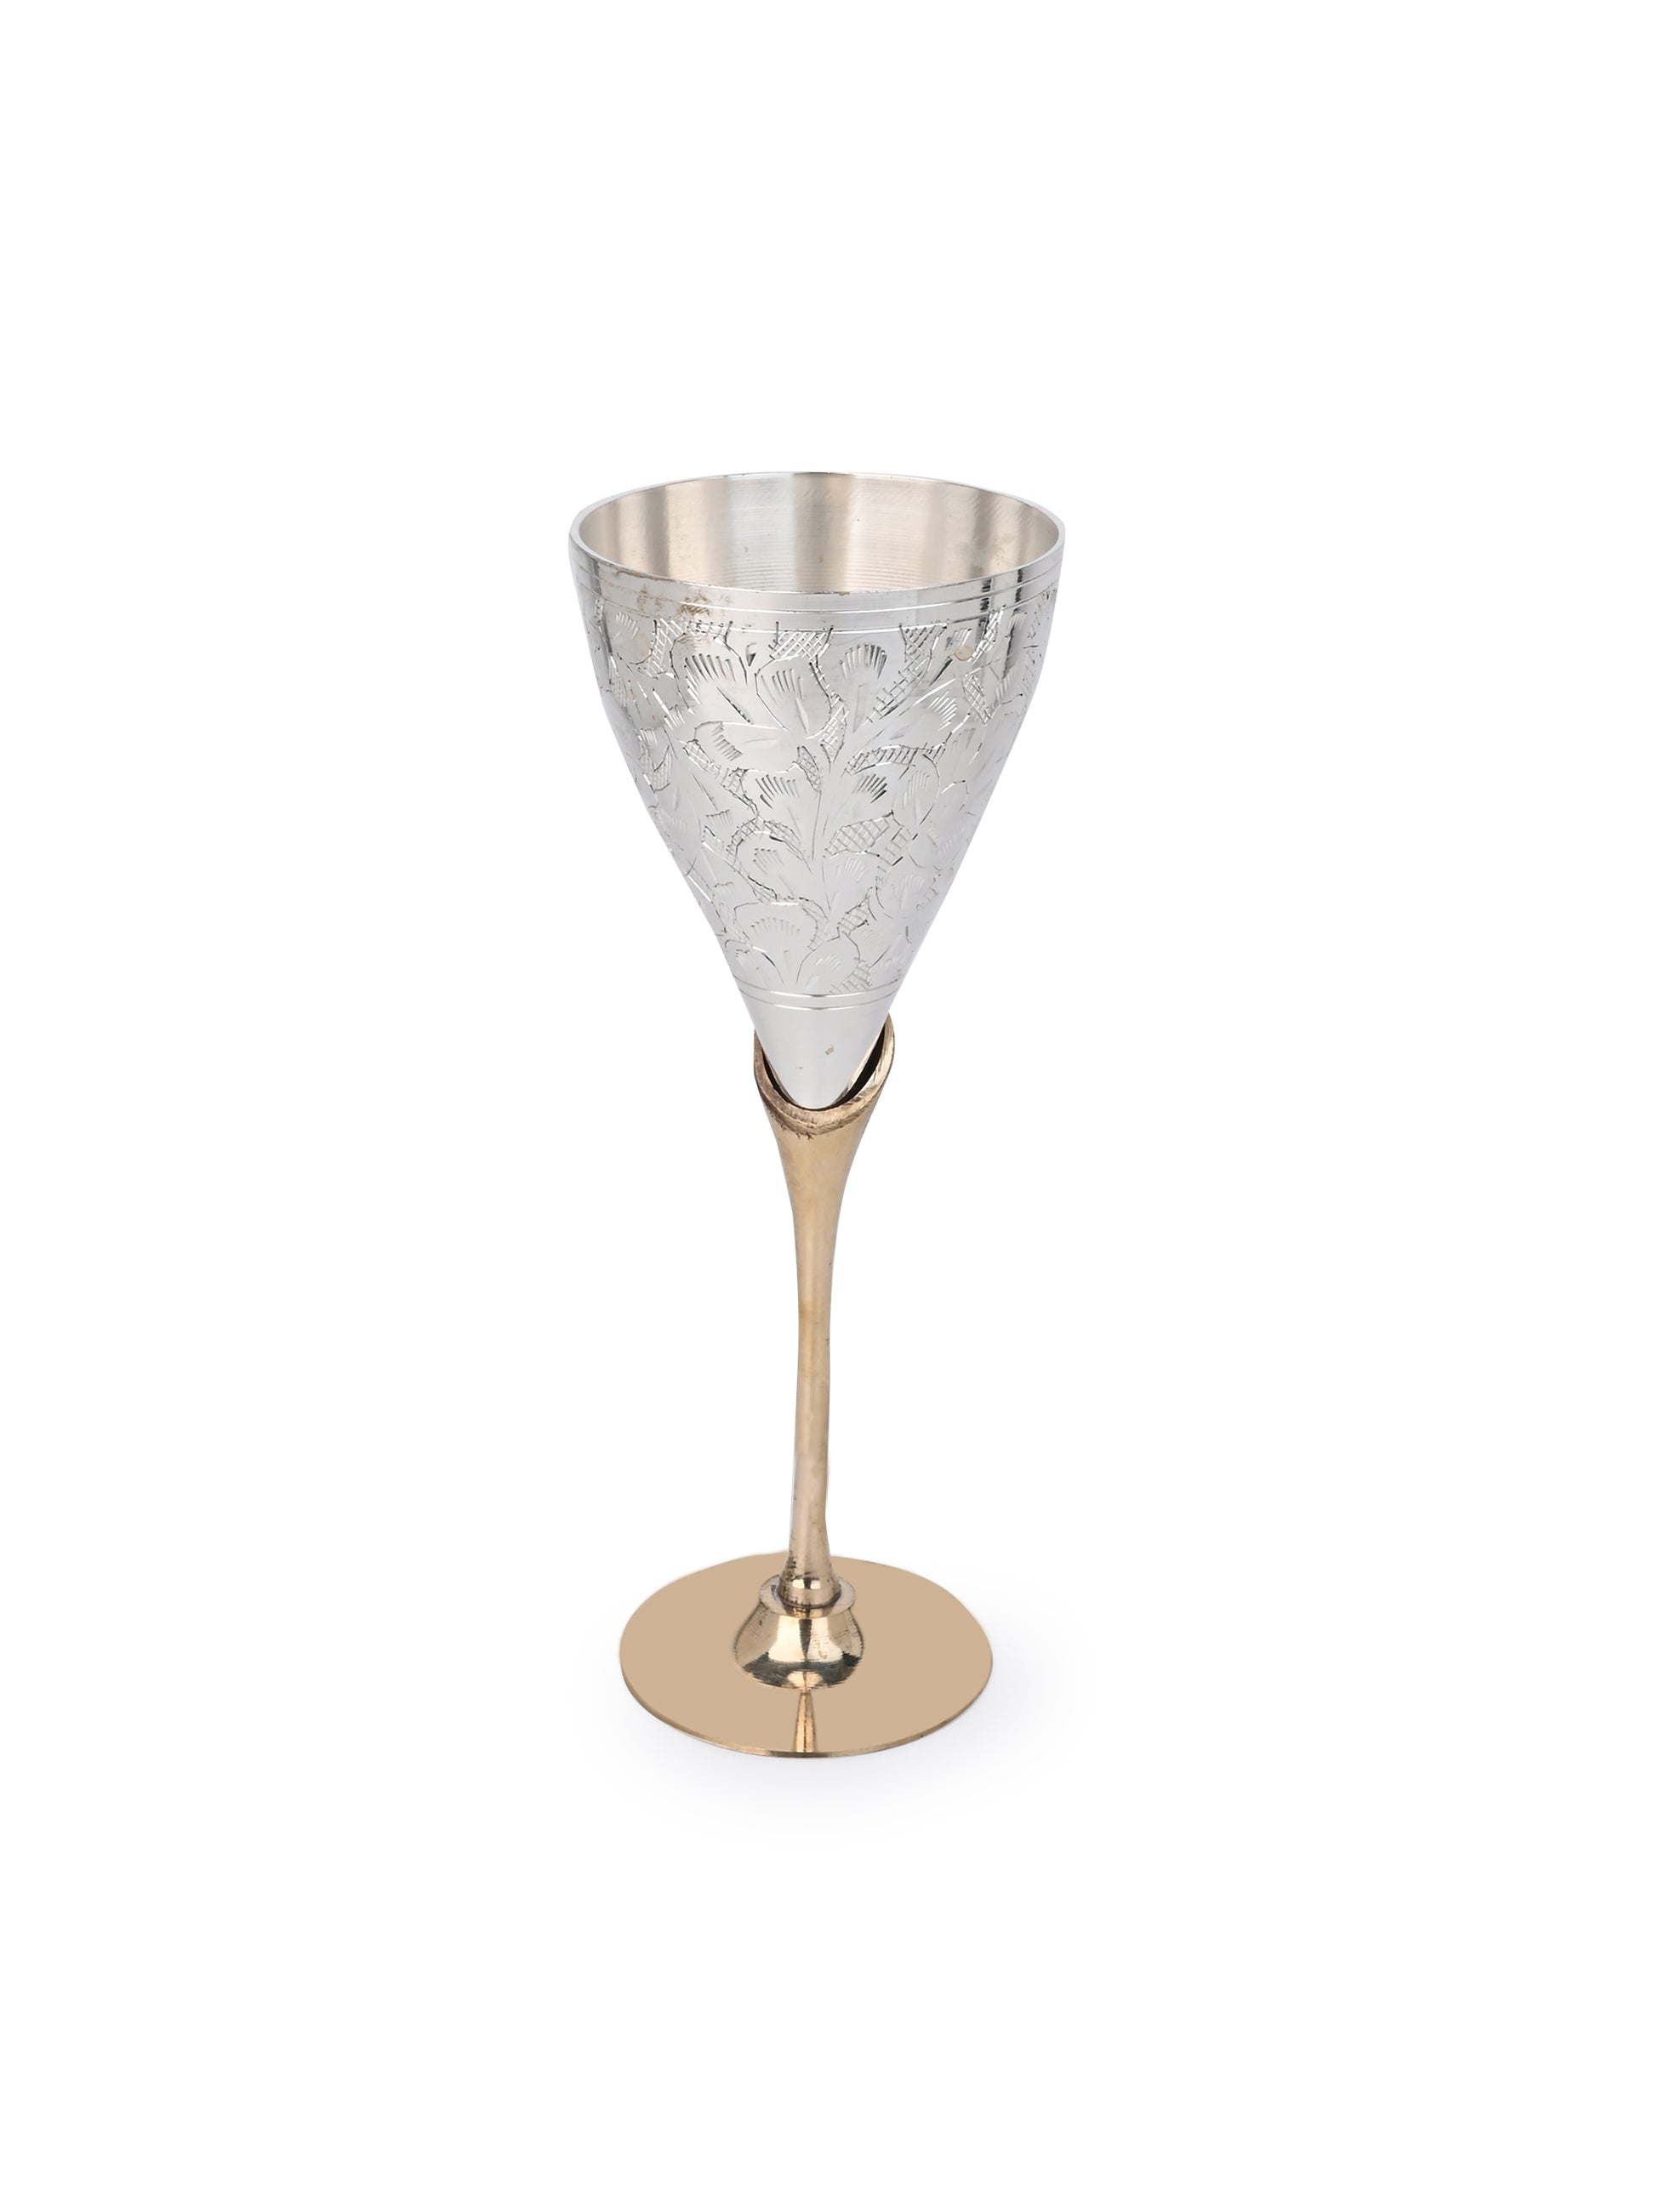 Brass Crafted Luxury Wine Goblets - Set of 2 in Red Velvet Gift box